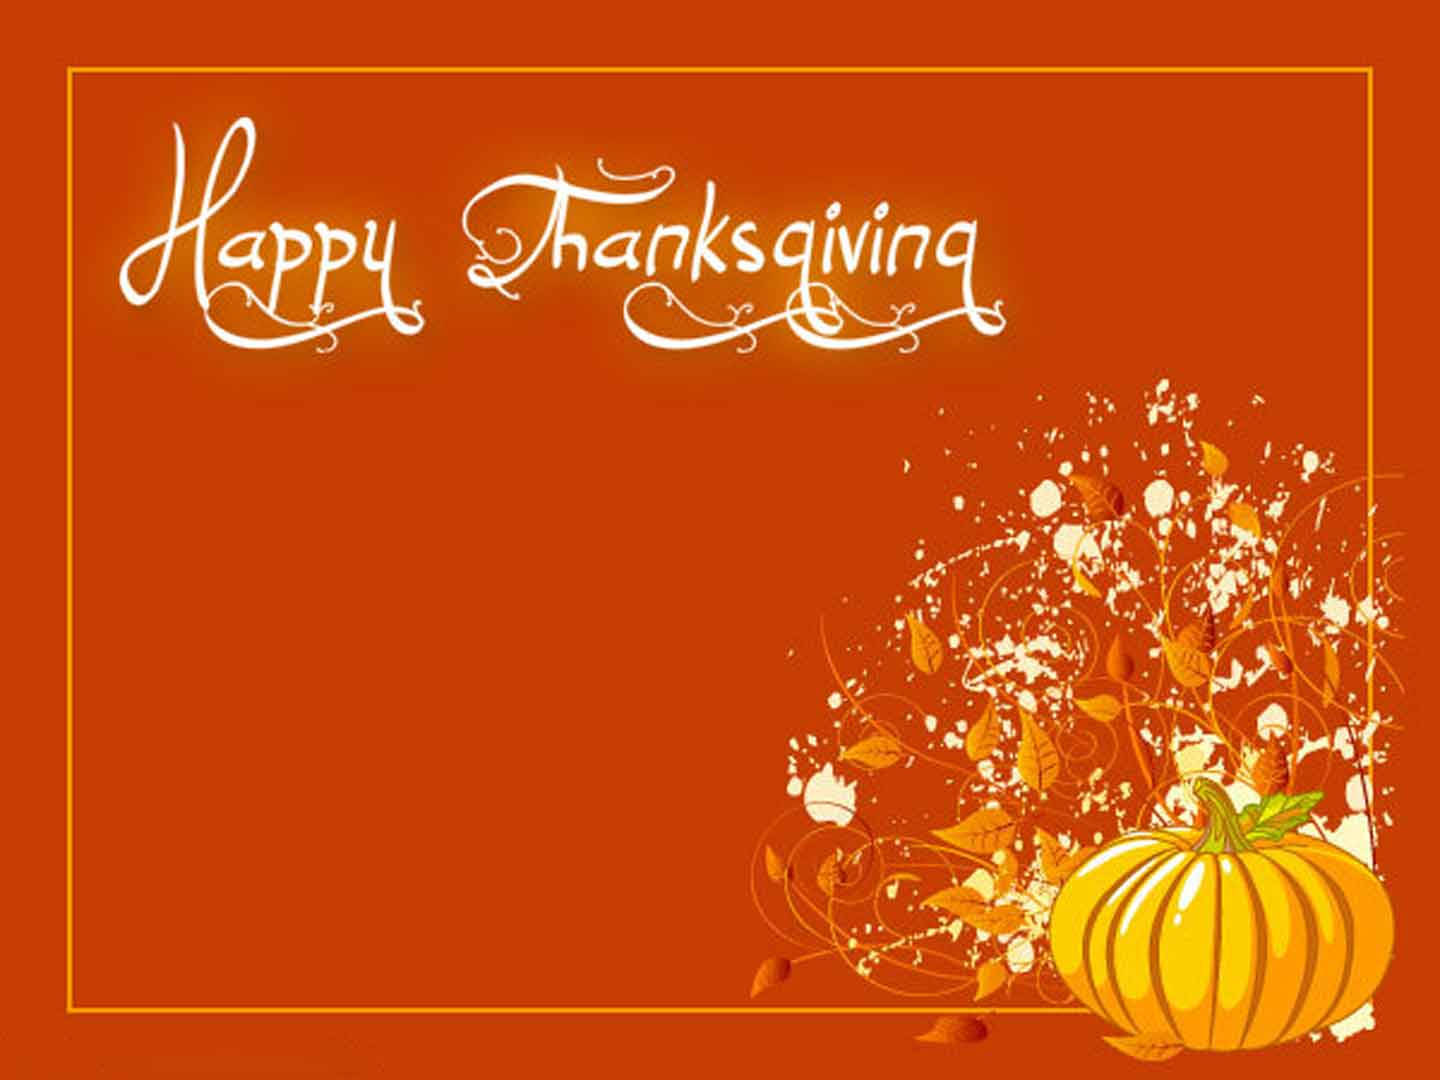 Thanksgiving background images free download turbotax premier + state 2021 tax software download